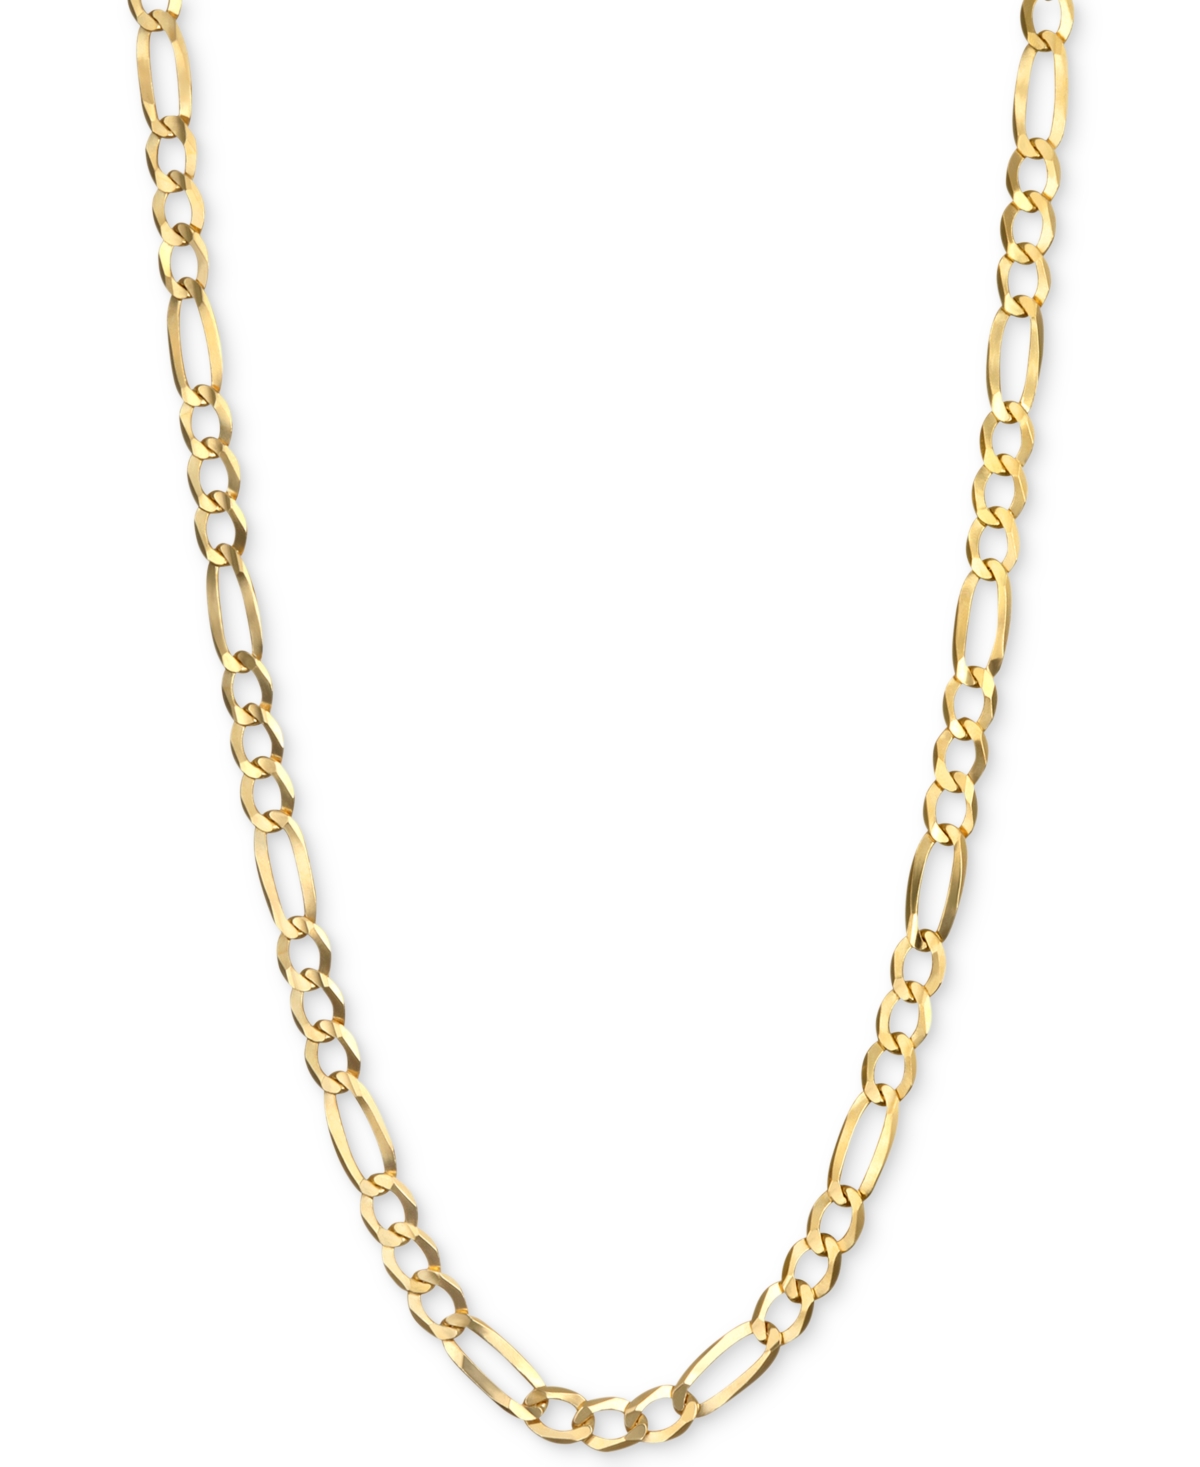 Italian Gold Figaro Link 28" Chain Necklace In 14k Gold